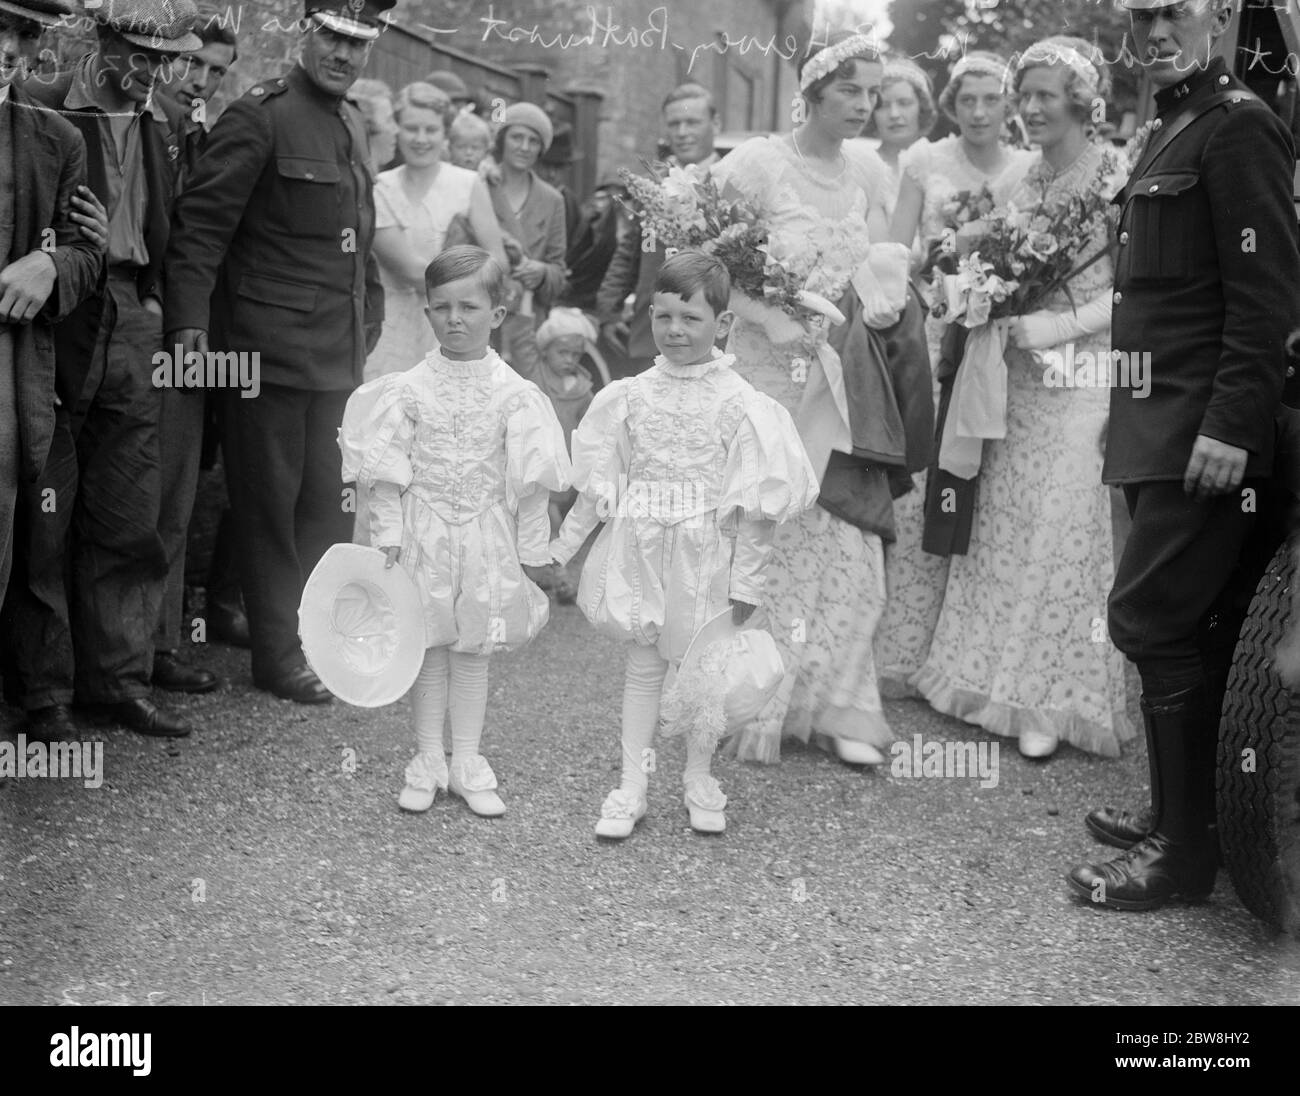 Lord Folkestone as page at wedding of Baronett son . The marriage of Mr Peter Hervey Bathurst and Miss Maureen Gordon at Cranborne Church , Dorset . Lord Folkestone ( right ) and Lennox Hannay , the two pages in their picturesque dress . 24 June 1933 Stock Photo